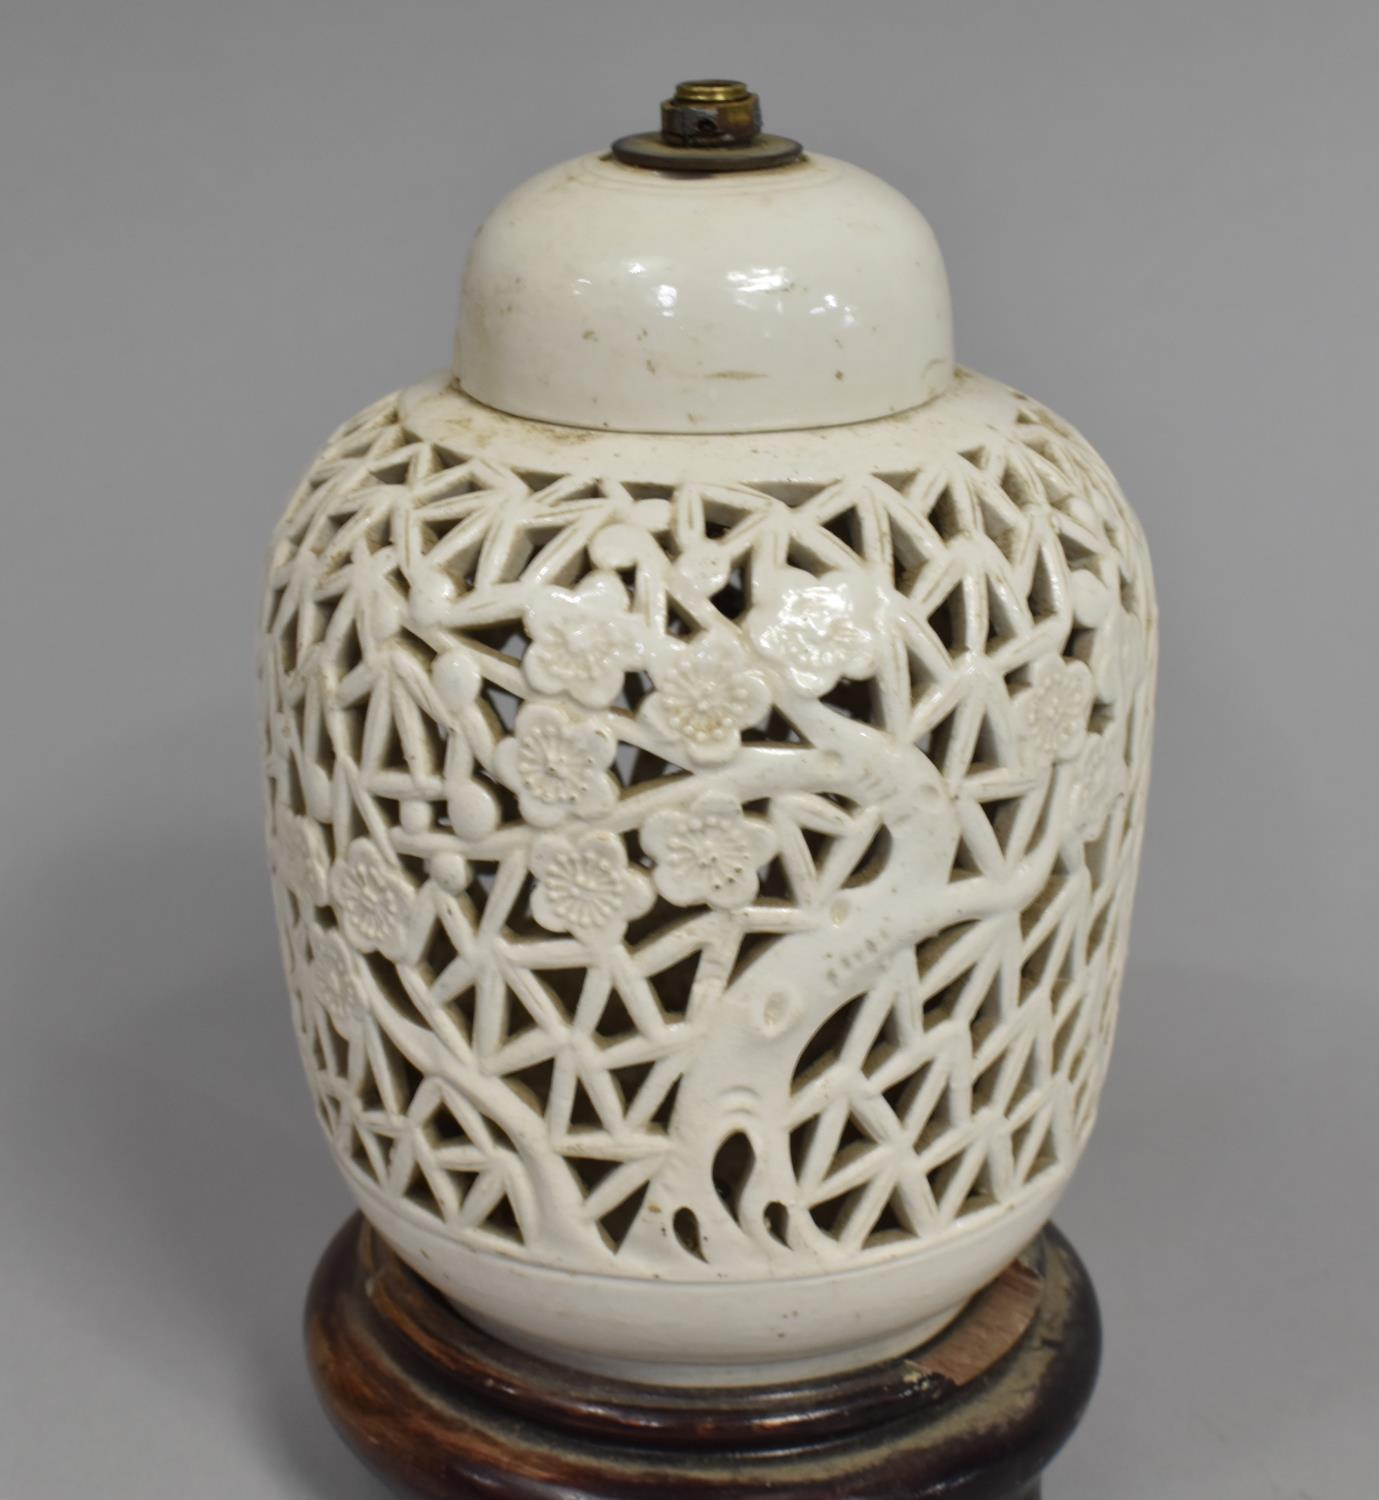 A Chinese Blanc De Chine Ginger Jar, Pierced Prunus Design, Now Converted to Table Lamp on Wooden - Image 2 of 2